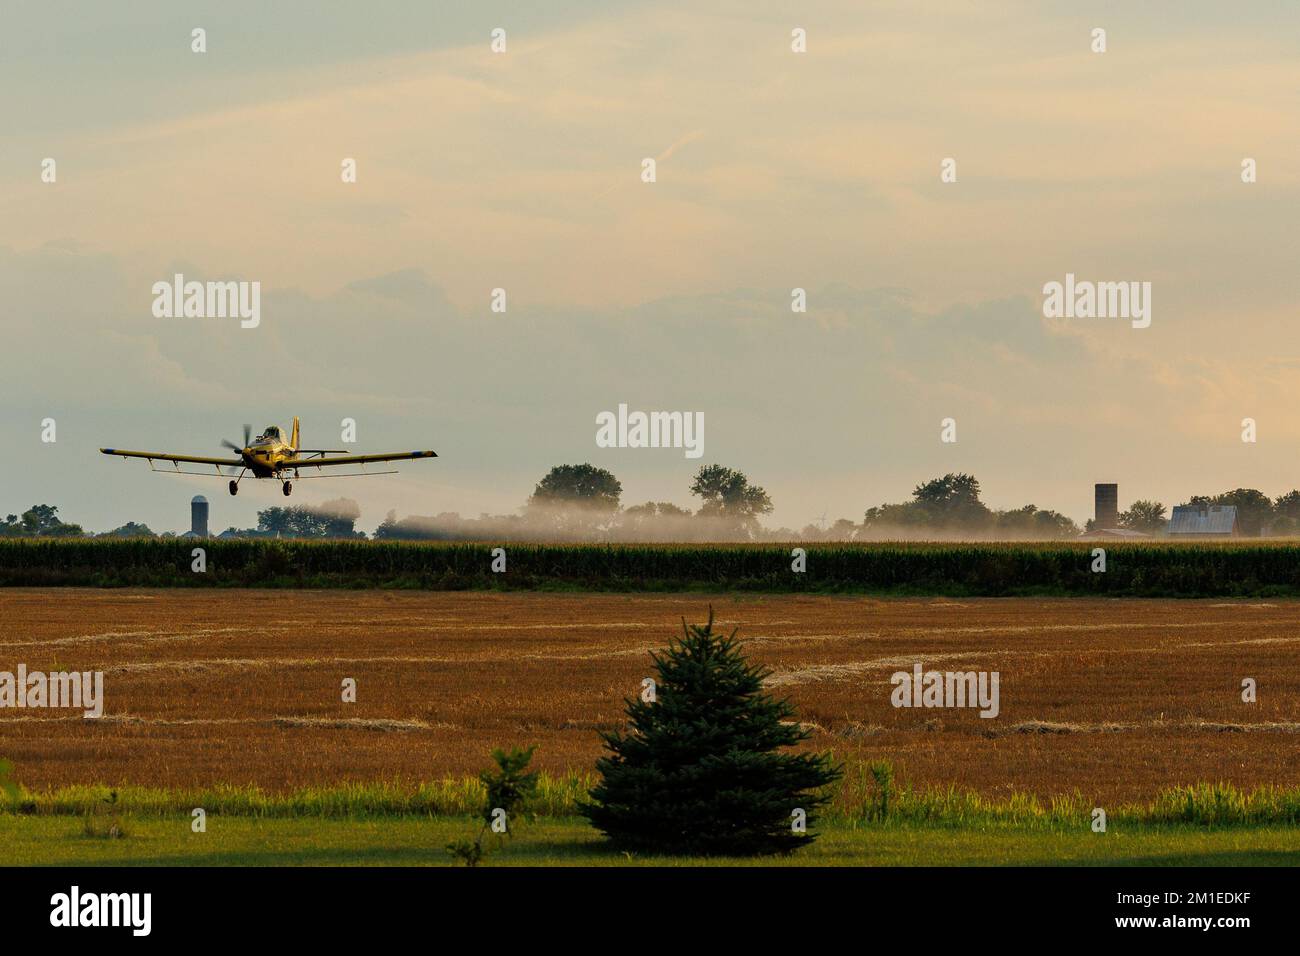 Aerial application by crop plane in rural Illinois Stock Photo